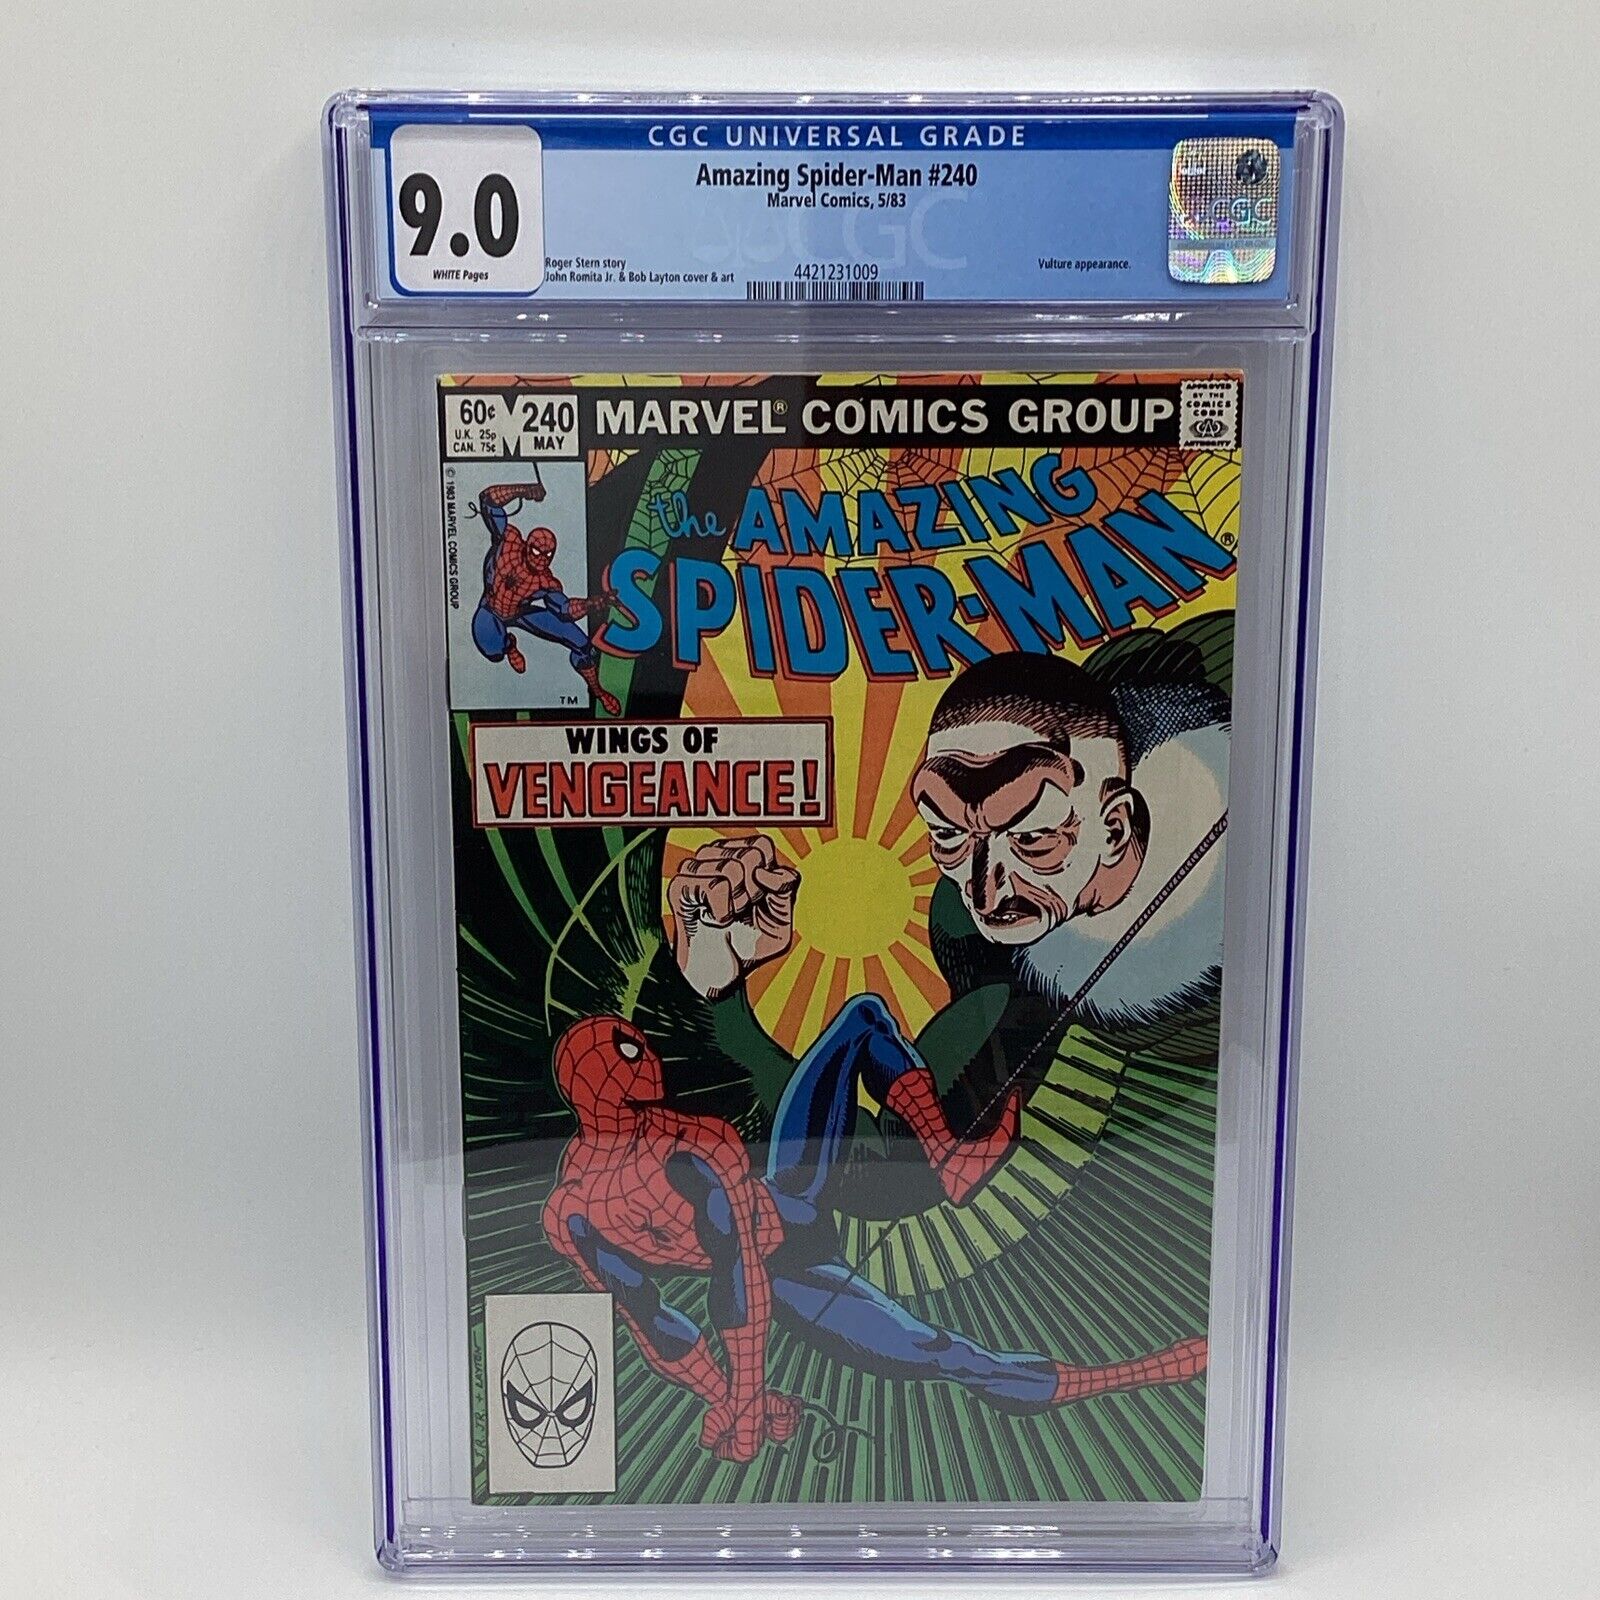 Vintage May 1983 Marvel The Amazing Spider-Man Issue #240 CGC Graded 9.0